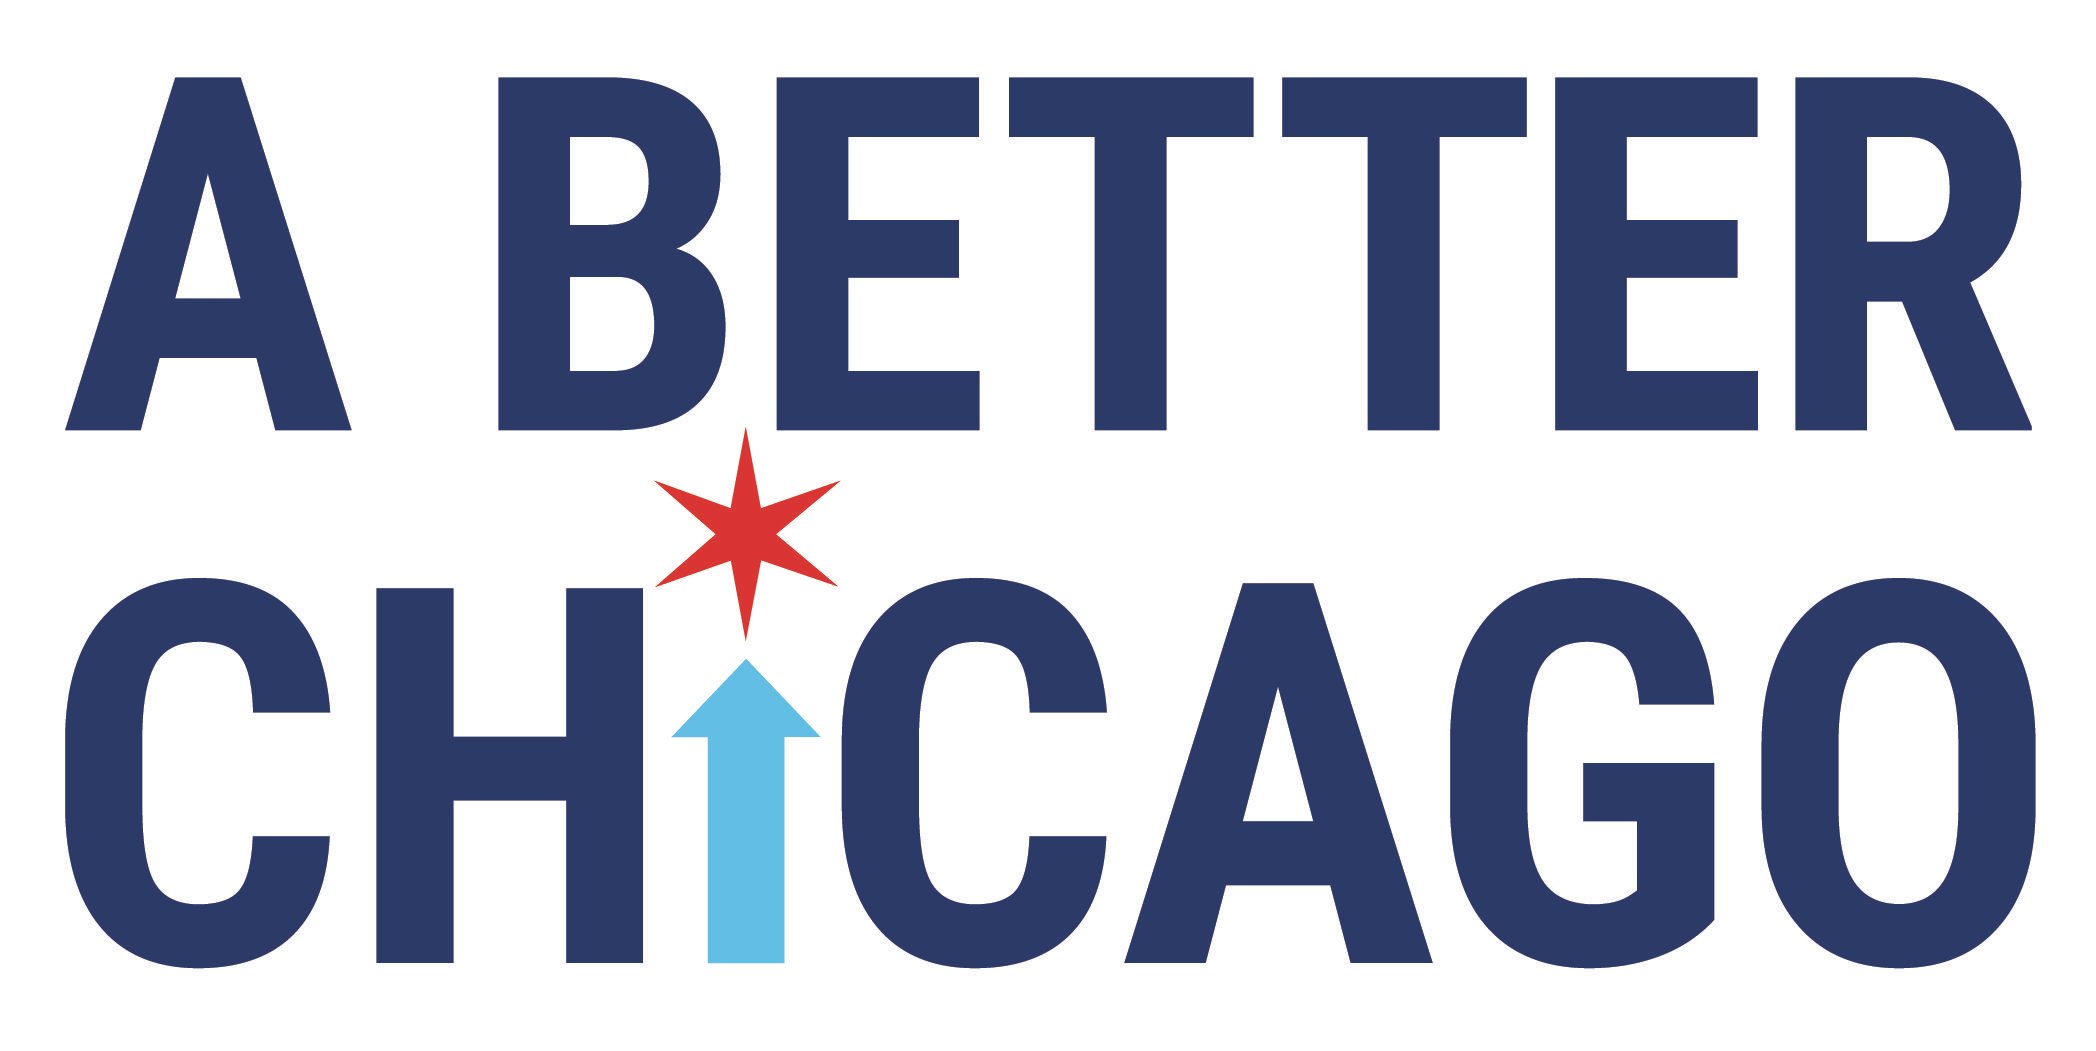 Chicago Logo - A Better Chicago • Fighting Poverty with Opportunity